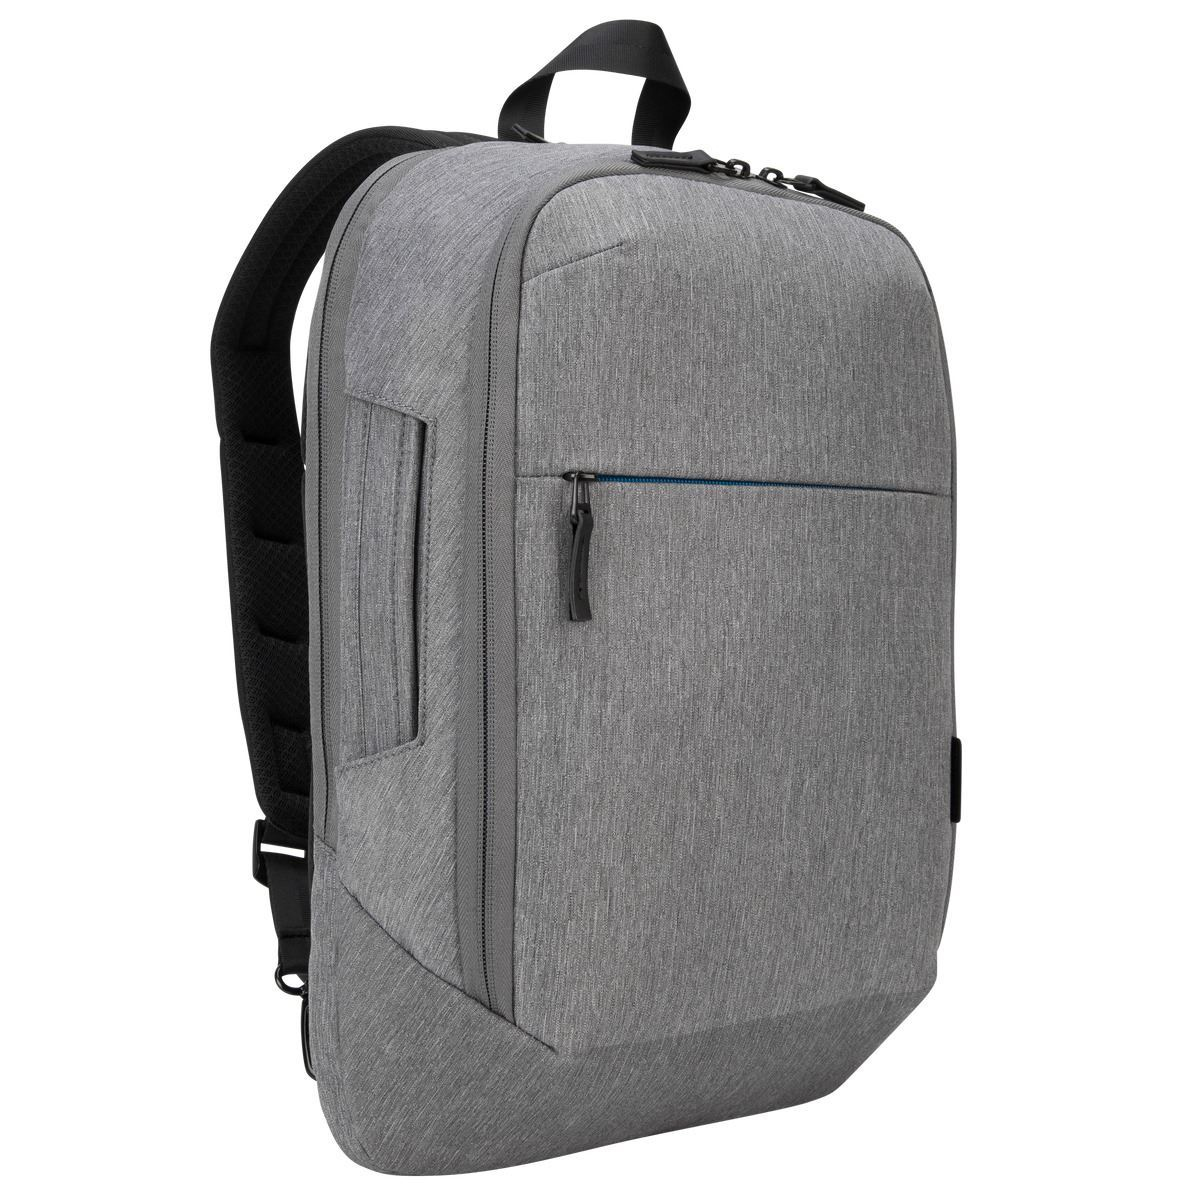 Targus CityLite Convertible Backpack / Briefcase Grey Fits Laptop up to 15.6 Inch